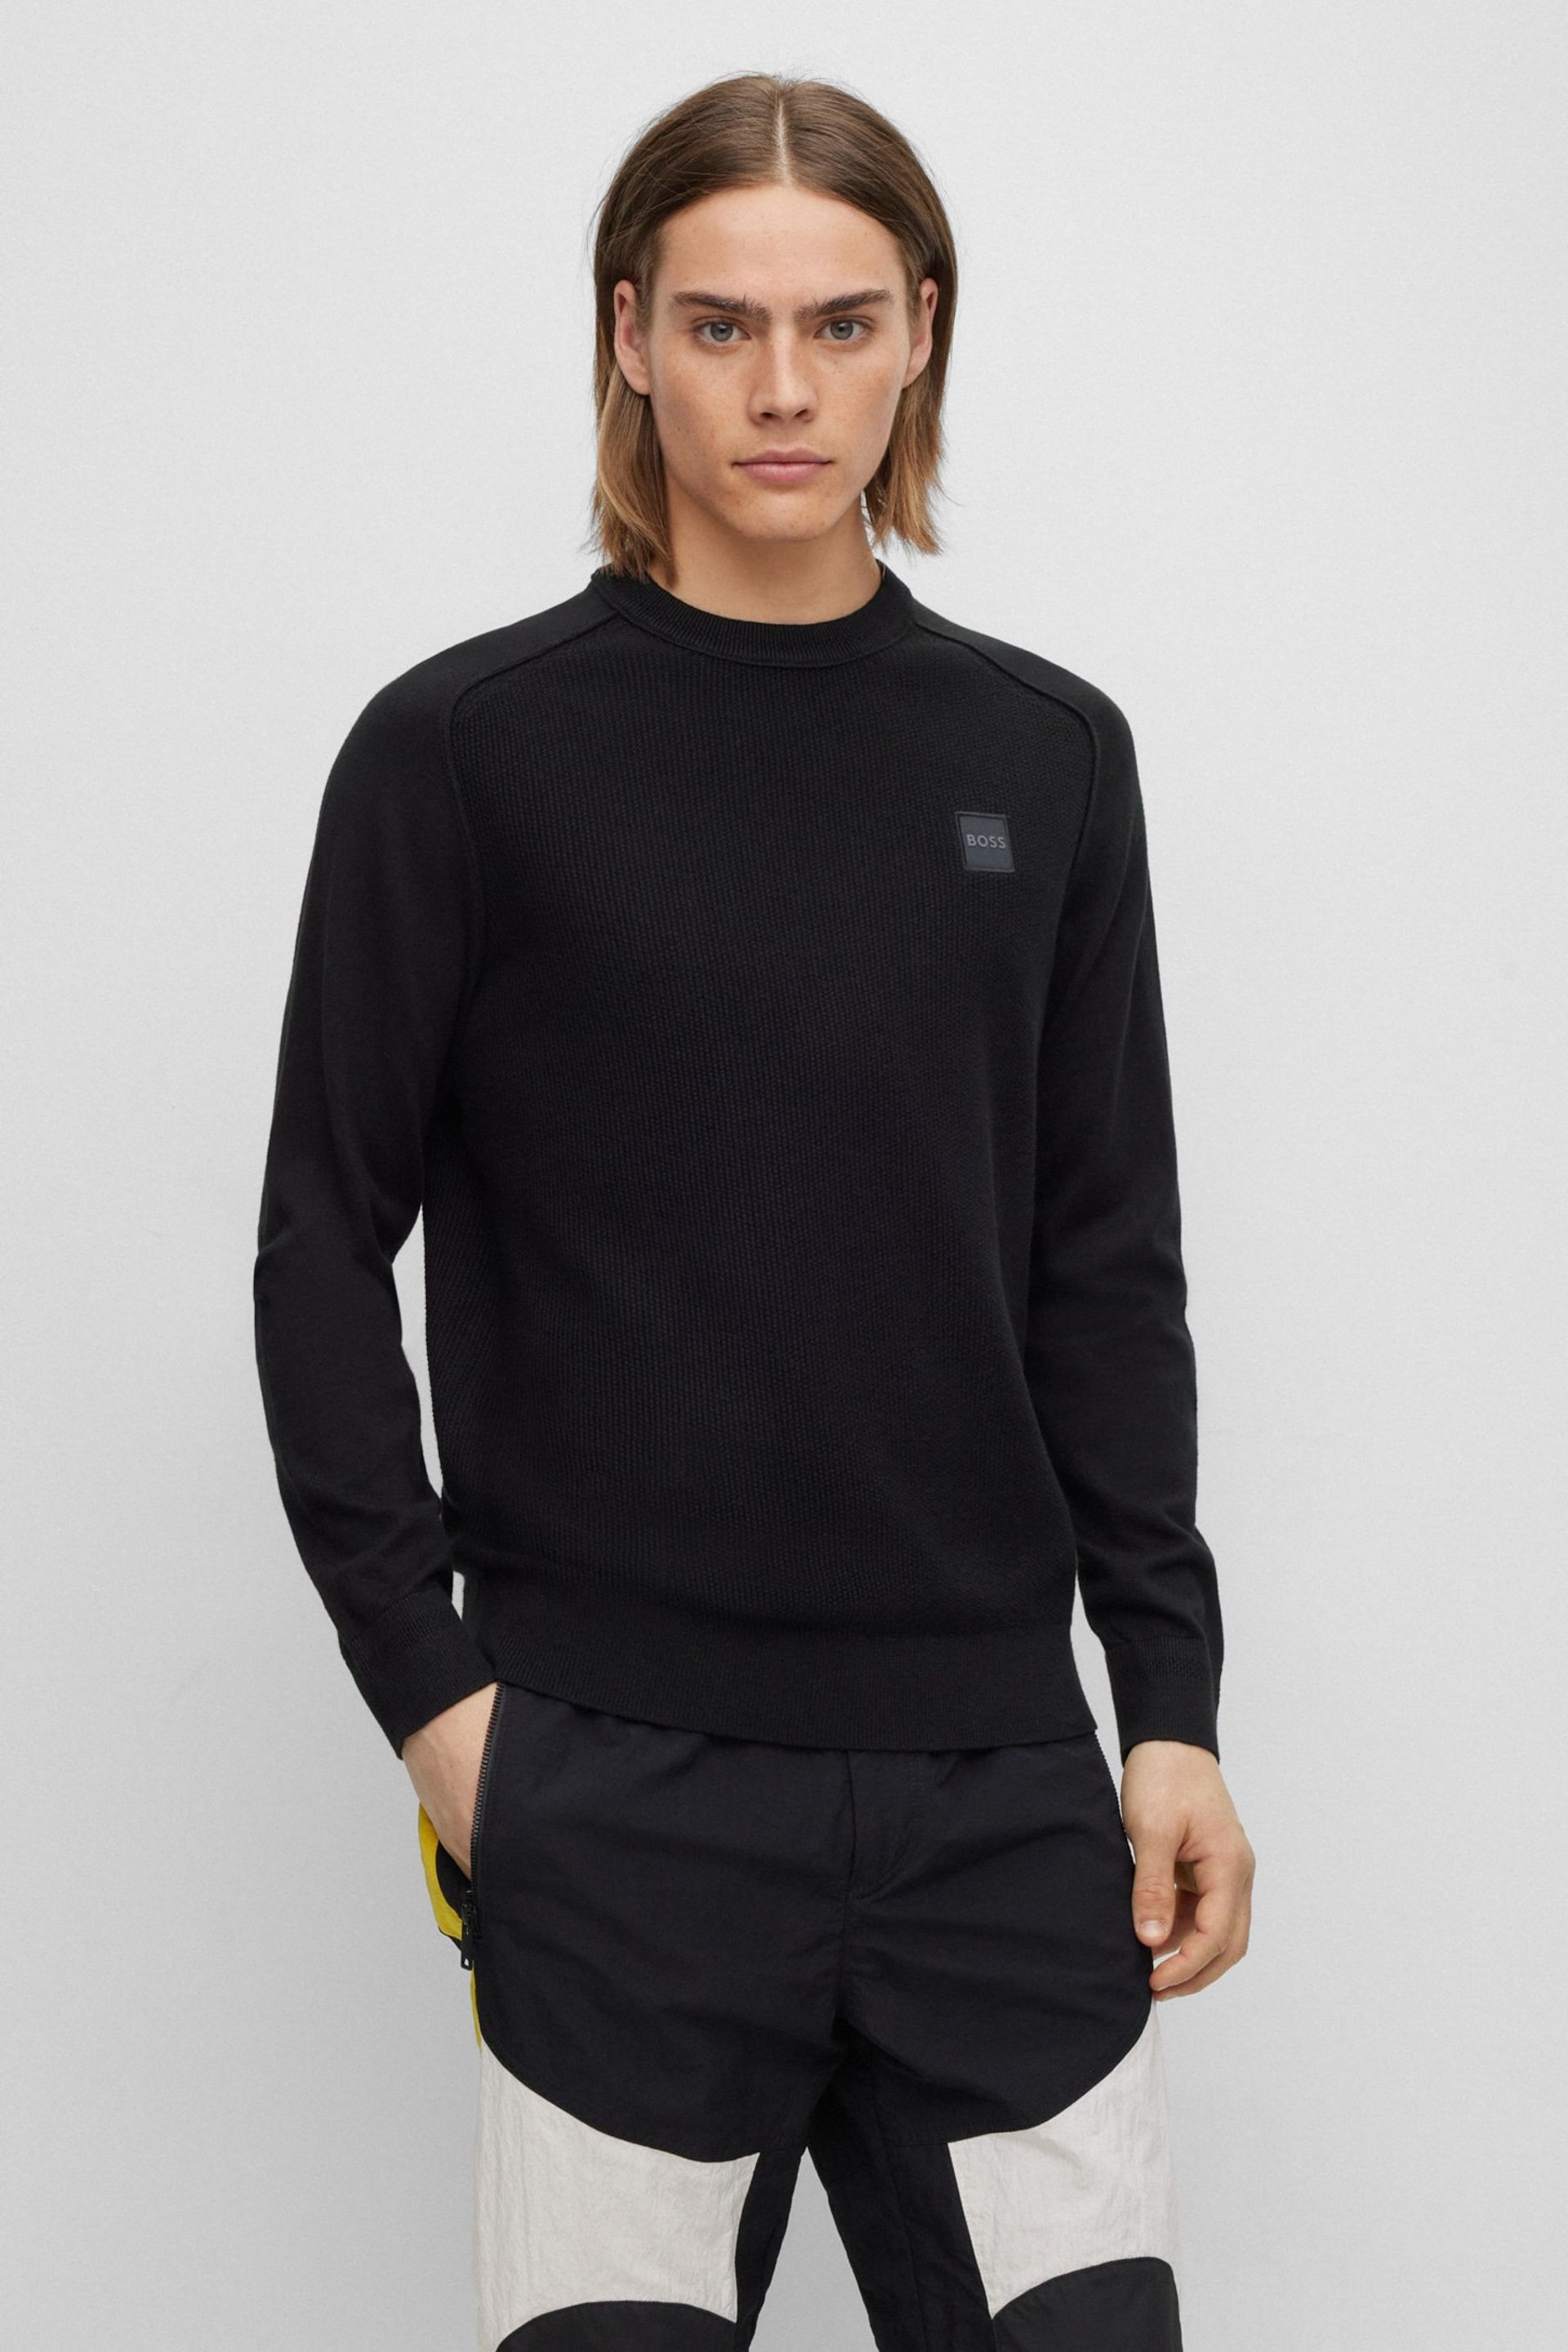 BOSS Black Textured Cotton Knitted Jumper With Cashmere - Image 1 of 5